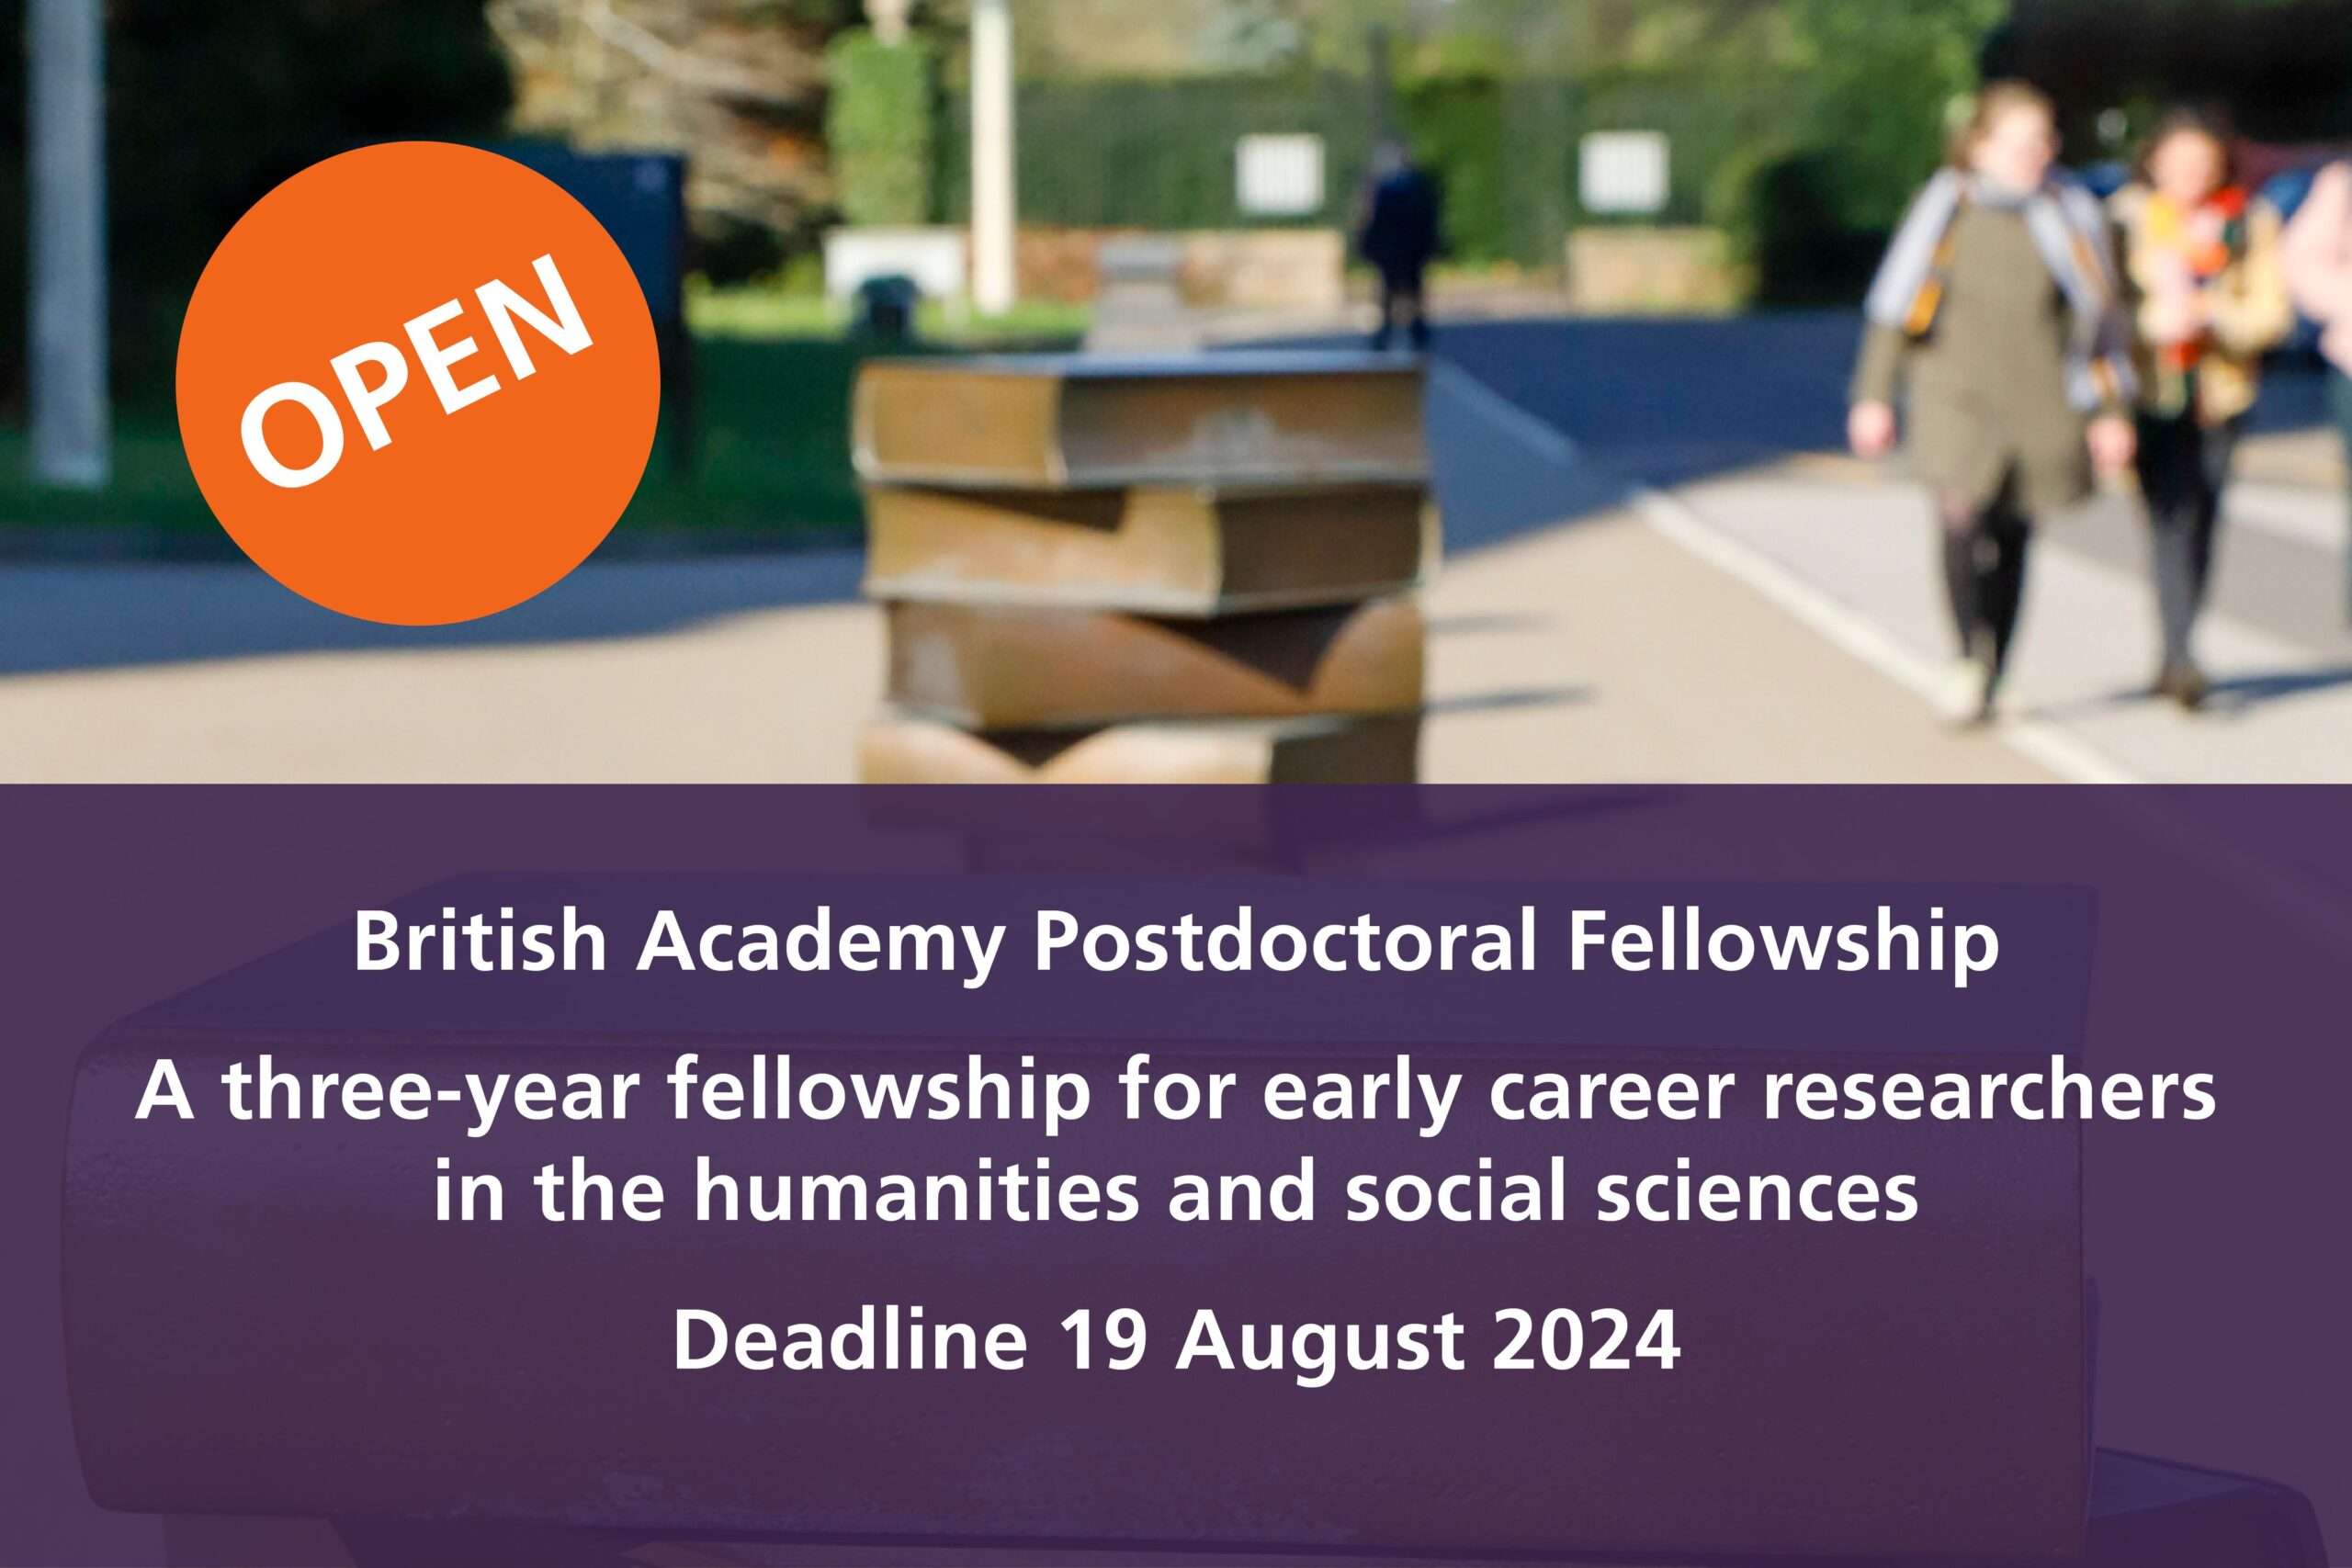 British Academy Postdoctoral Fellowship applications open for UK/EEA nationals and UK graduates